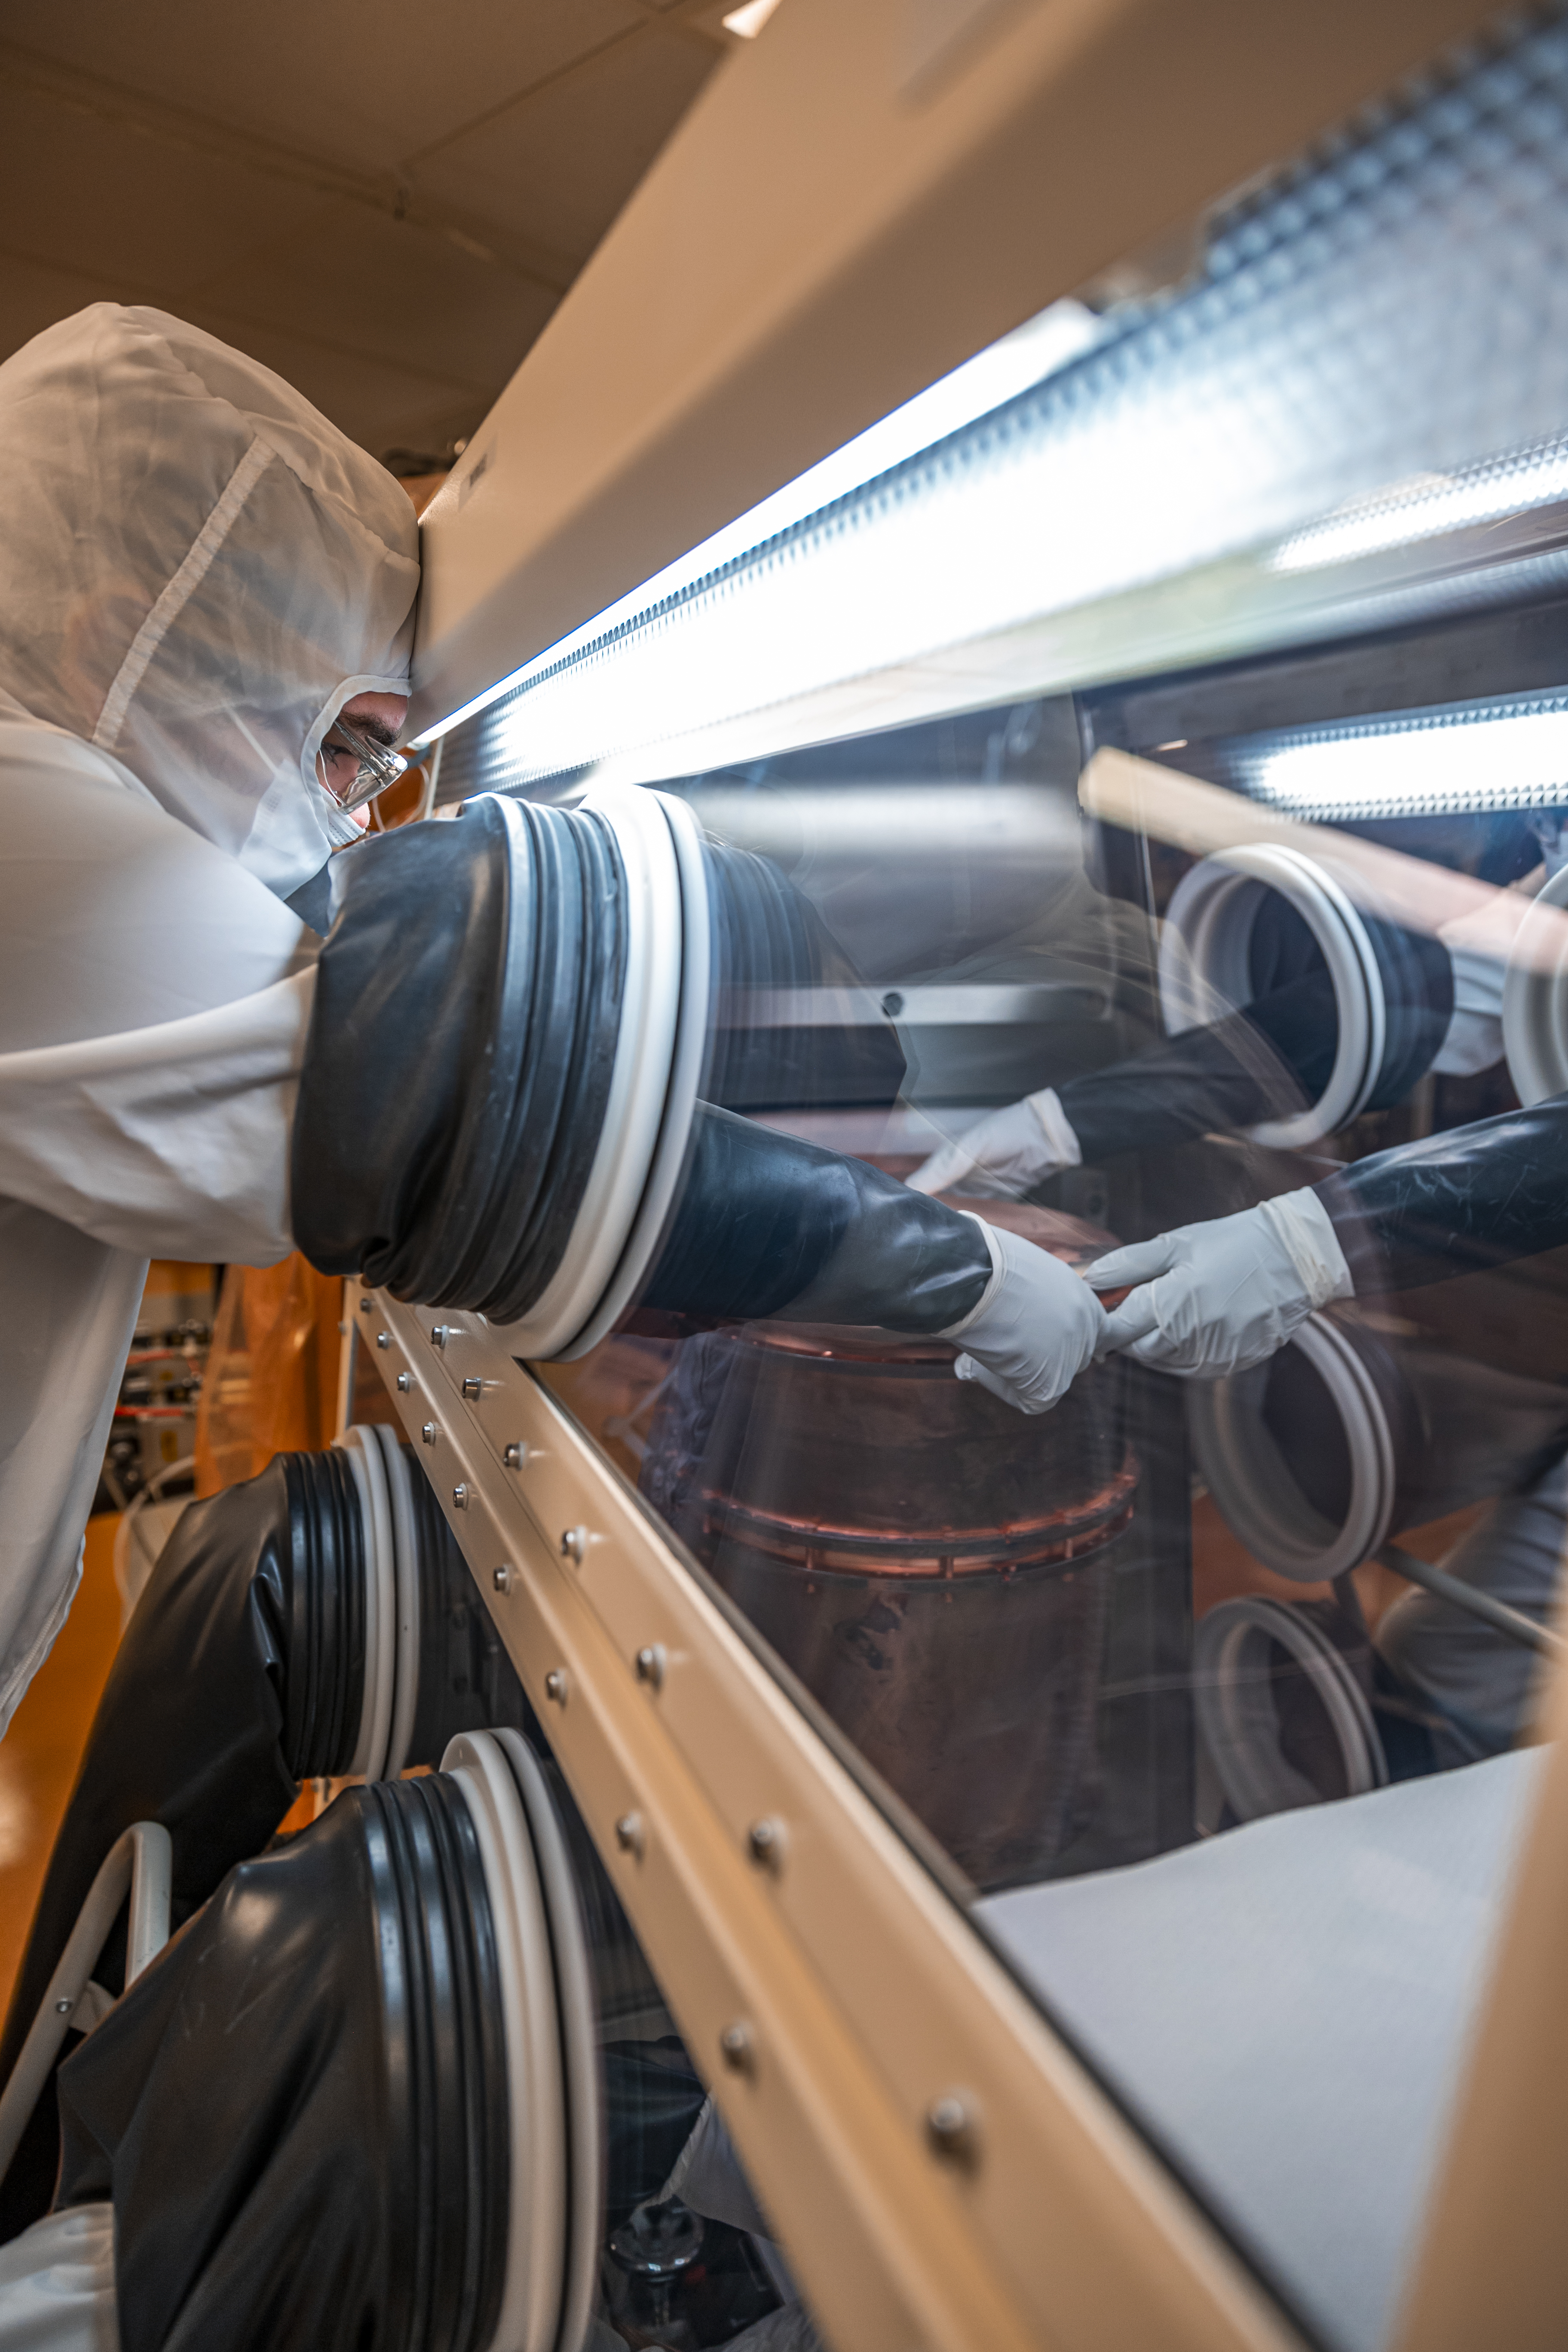 researcher in a clean suit reaches into a glovebox